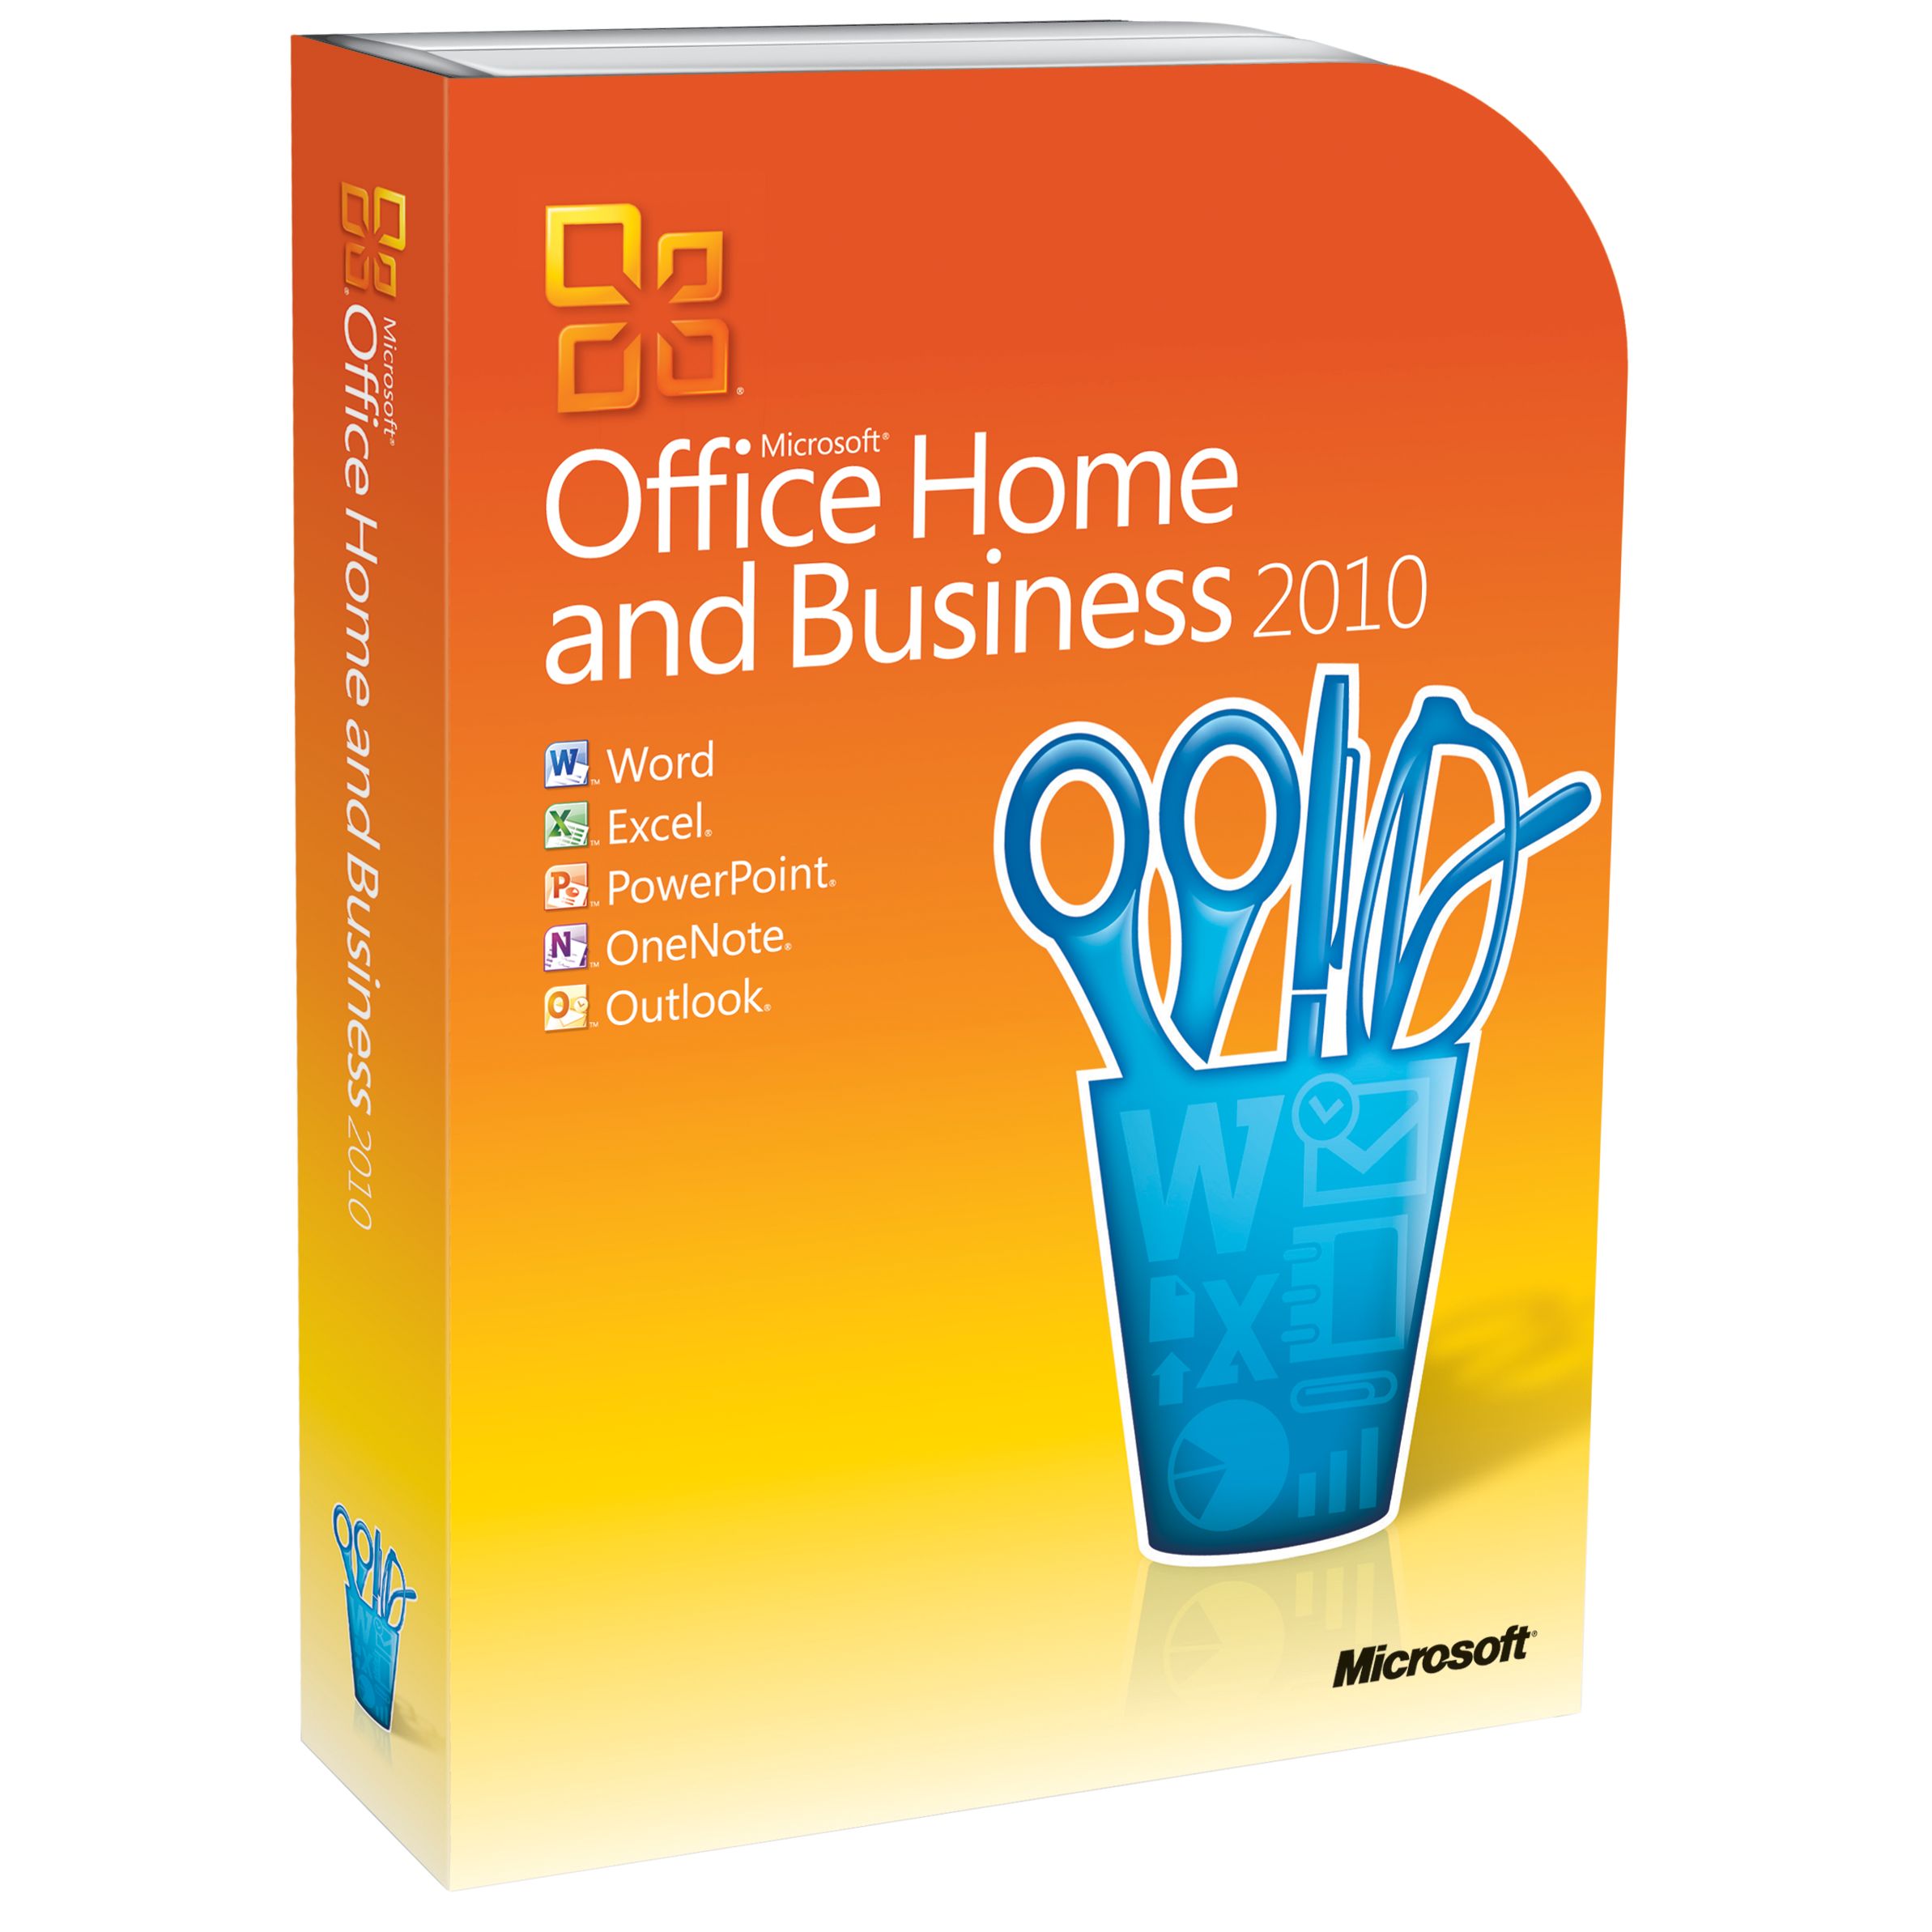 Microsoft Office 2010 Home and Business CD-ROM for PC, 1 User at JohnLewis